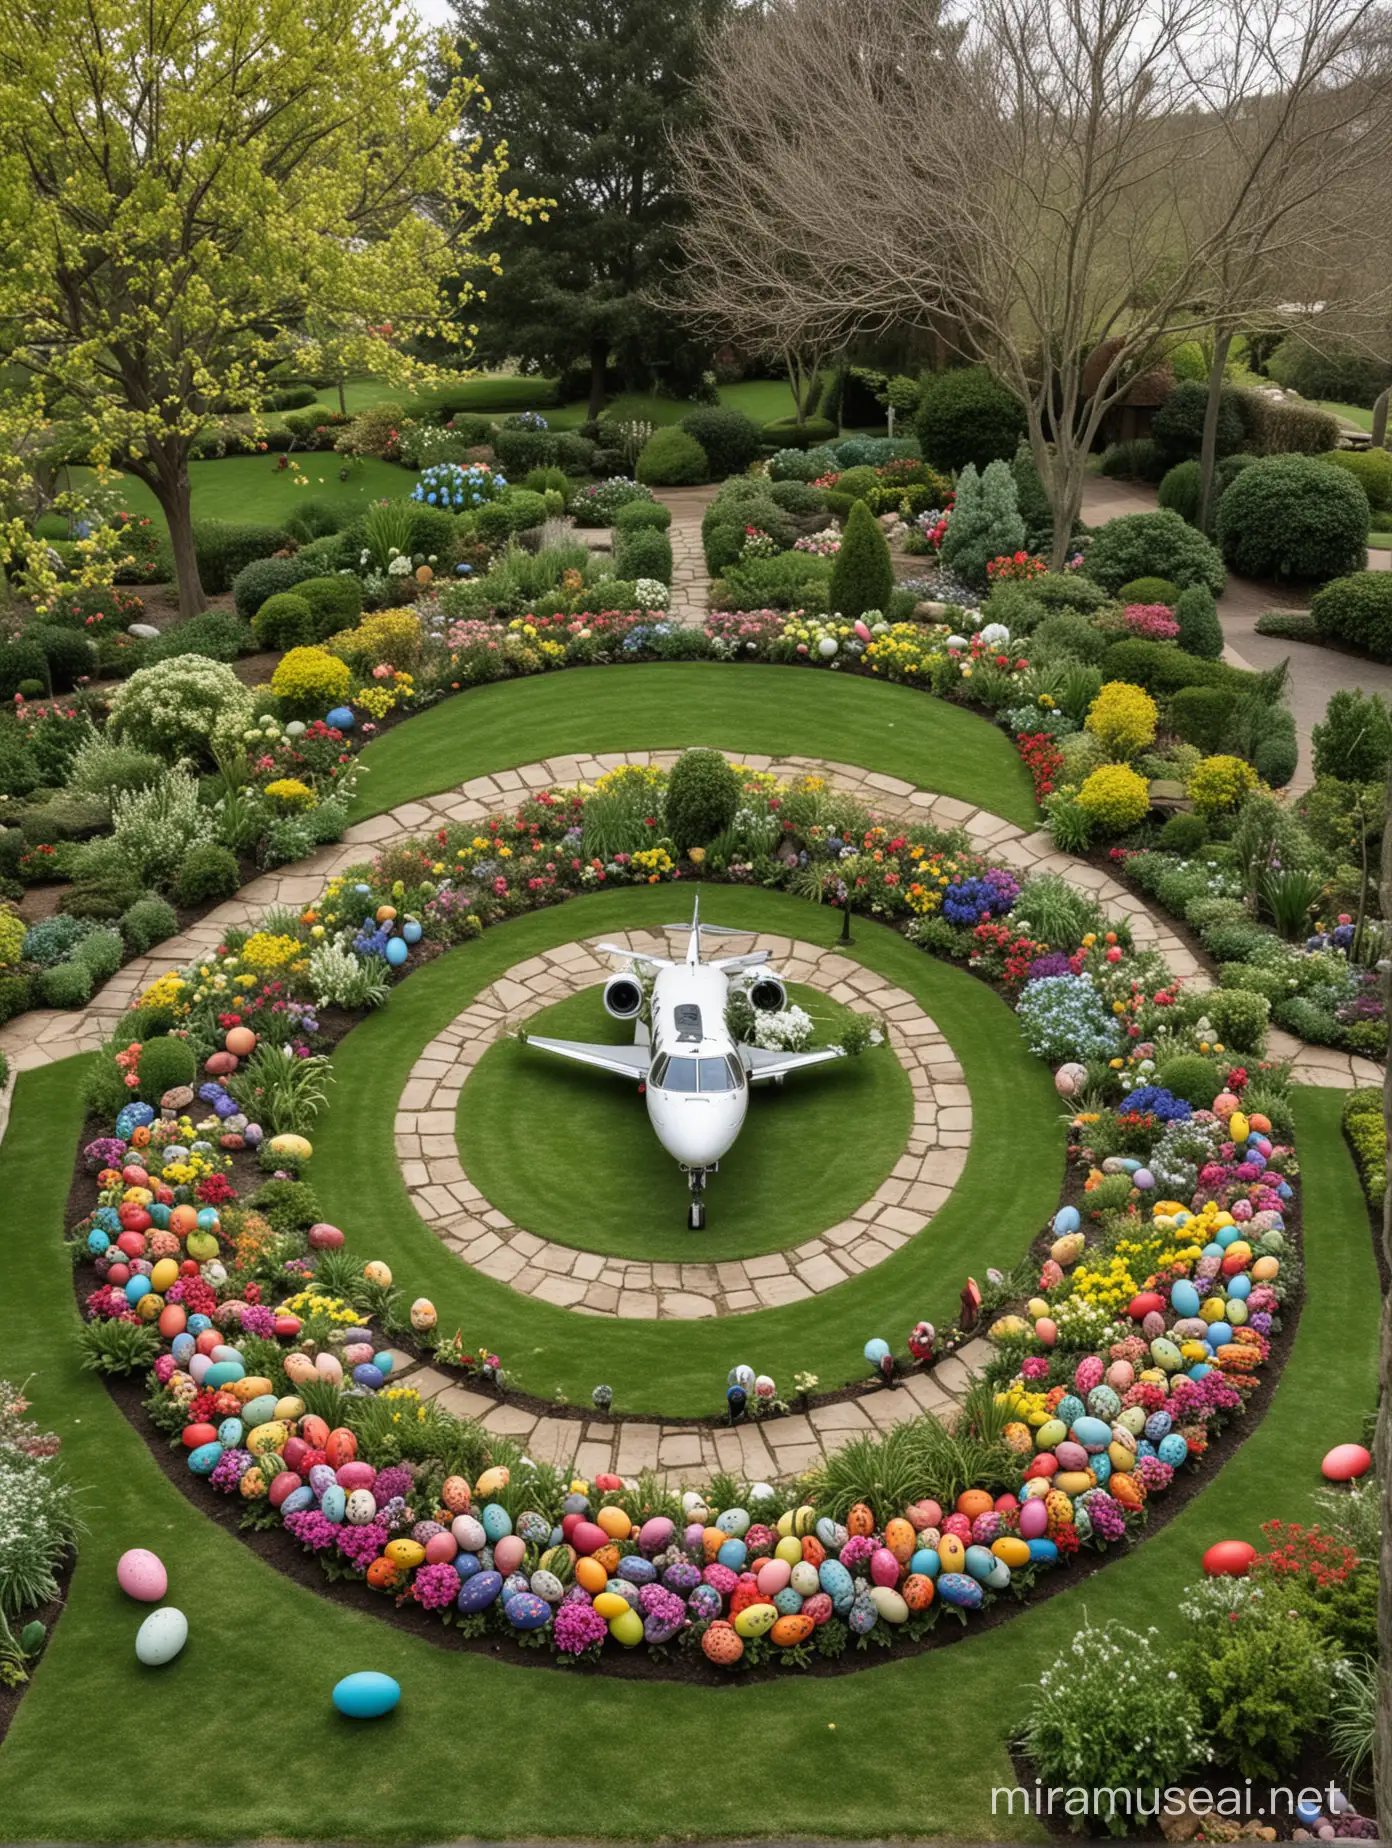 Garden-like place, full of easter egg, leave the center empty so I can put a private jet